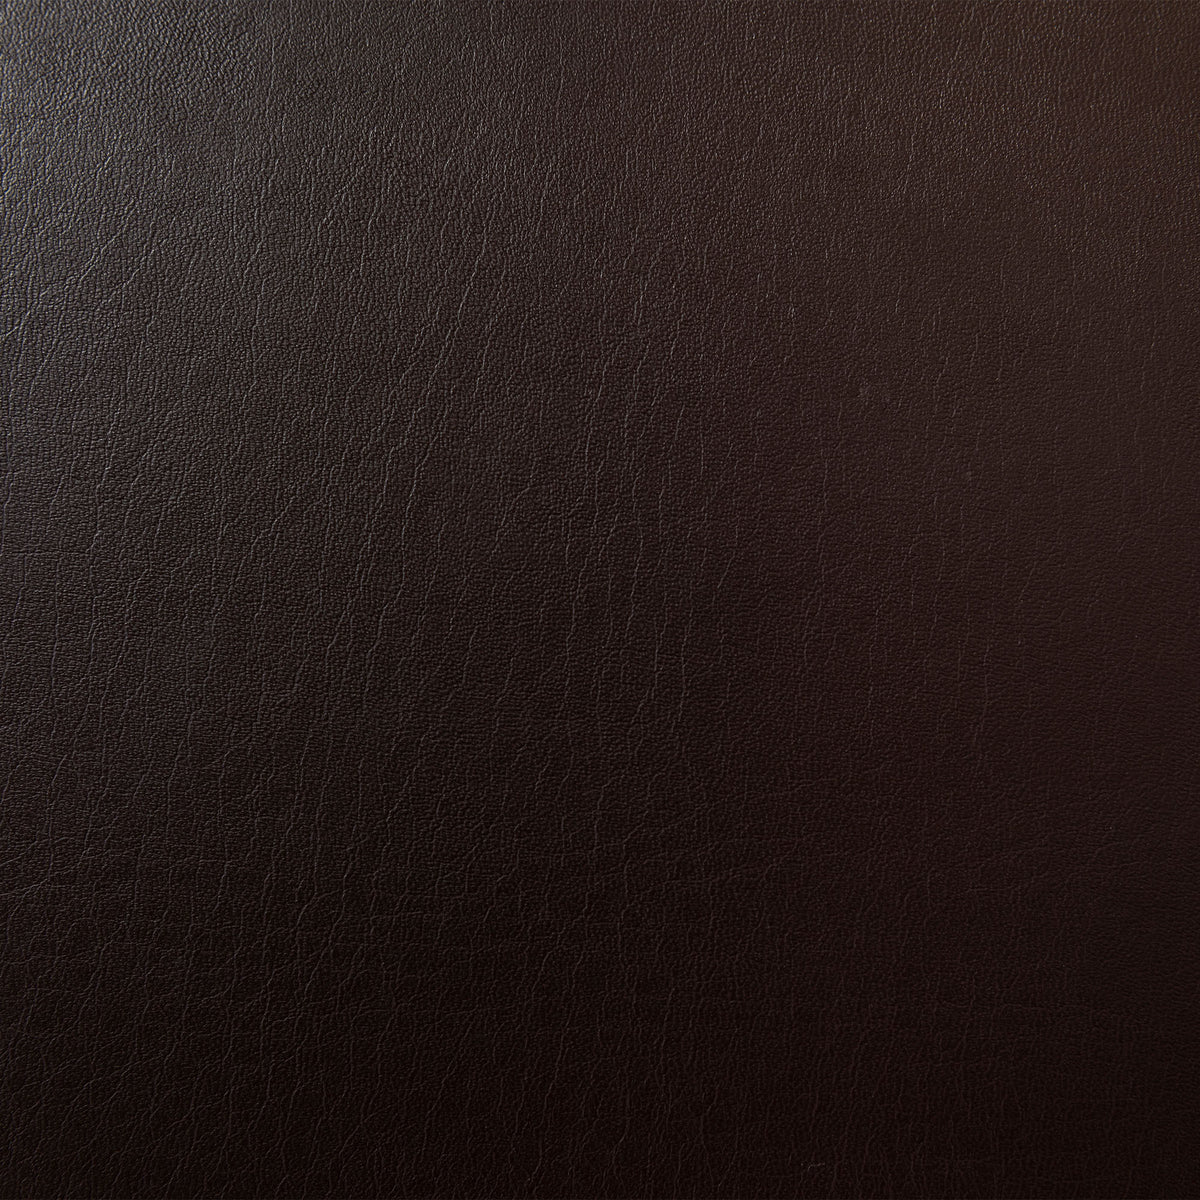 Texture detail of the brown leather material used on the Inner Balance Jin 2.0 Massage Chair